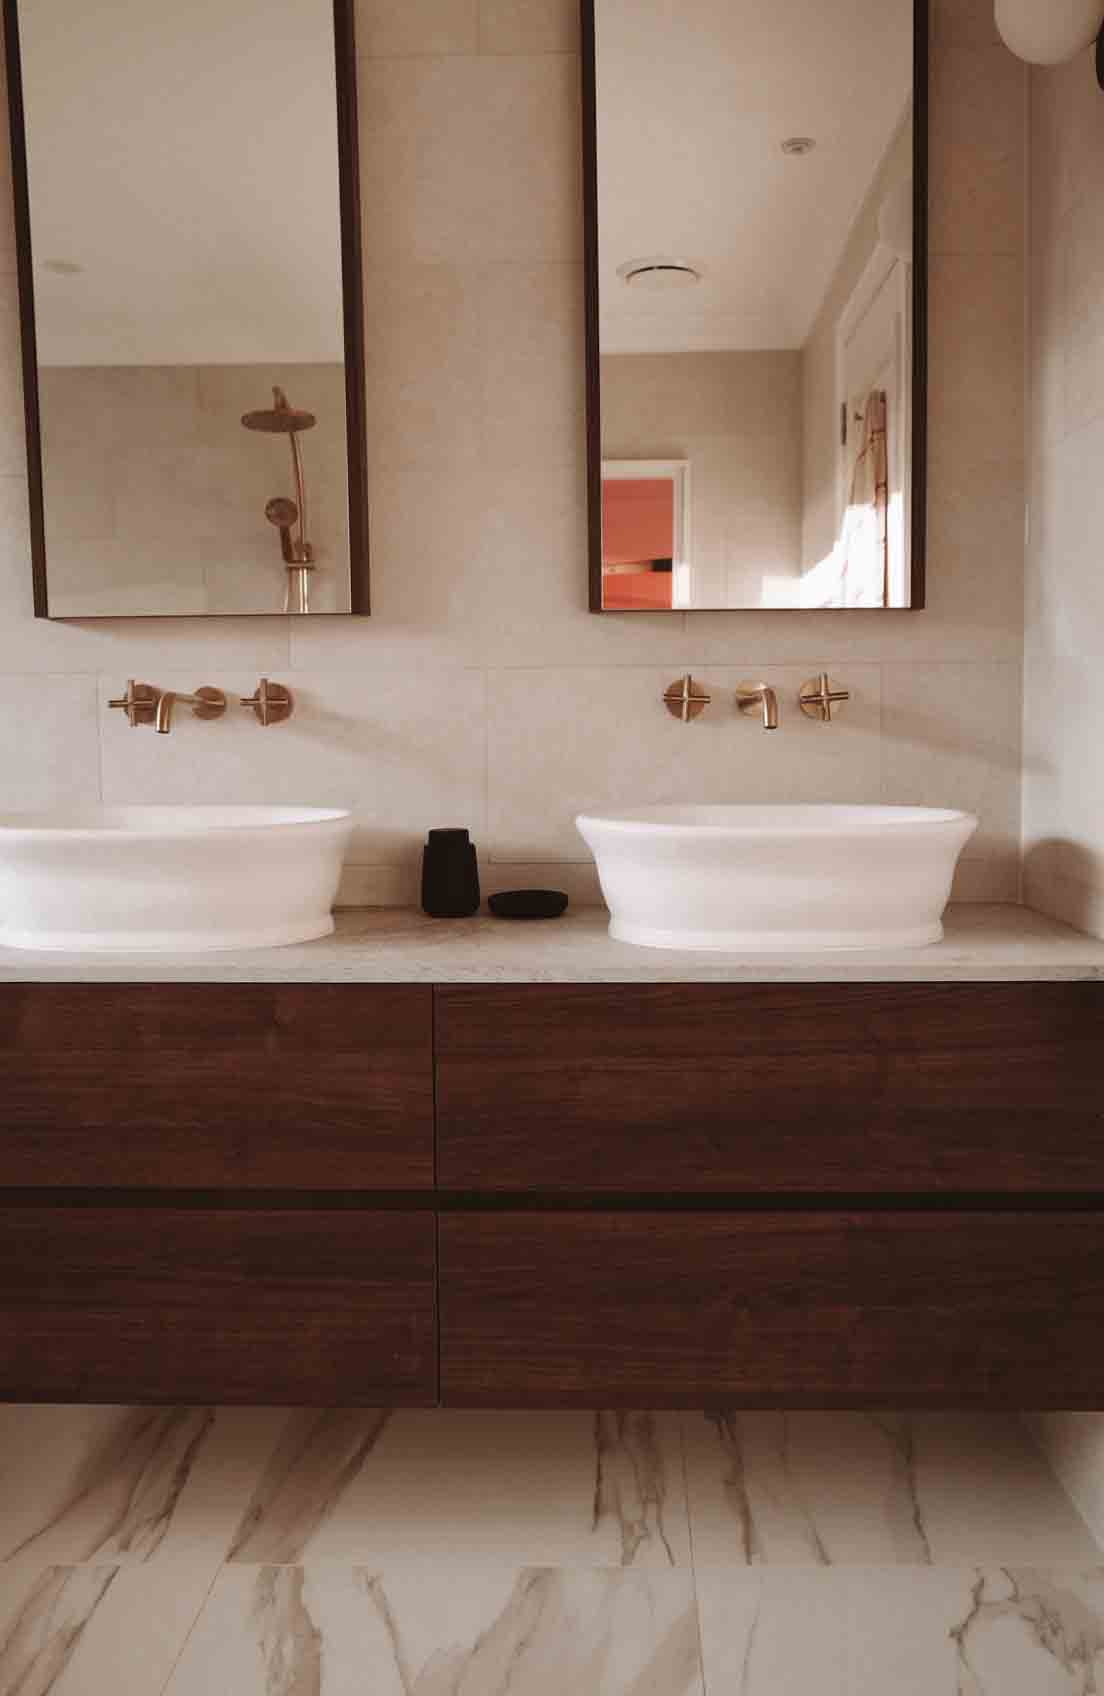 TURNER HASTINGS CAMBRIDGE OVAL TITANCAST SOLID SURFACE ABOVE COUNTER BASIN SATIN SILK WHITE 535MM